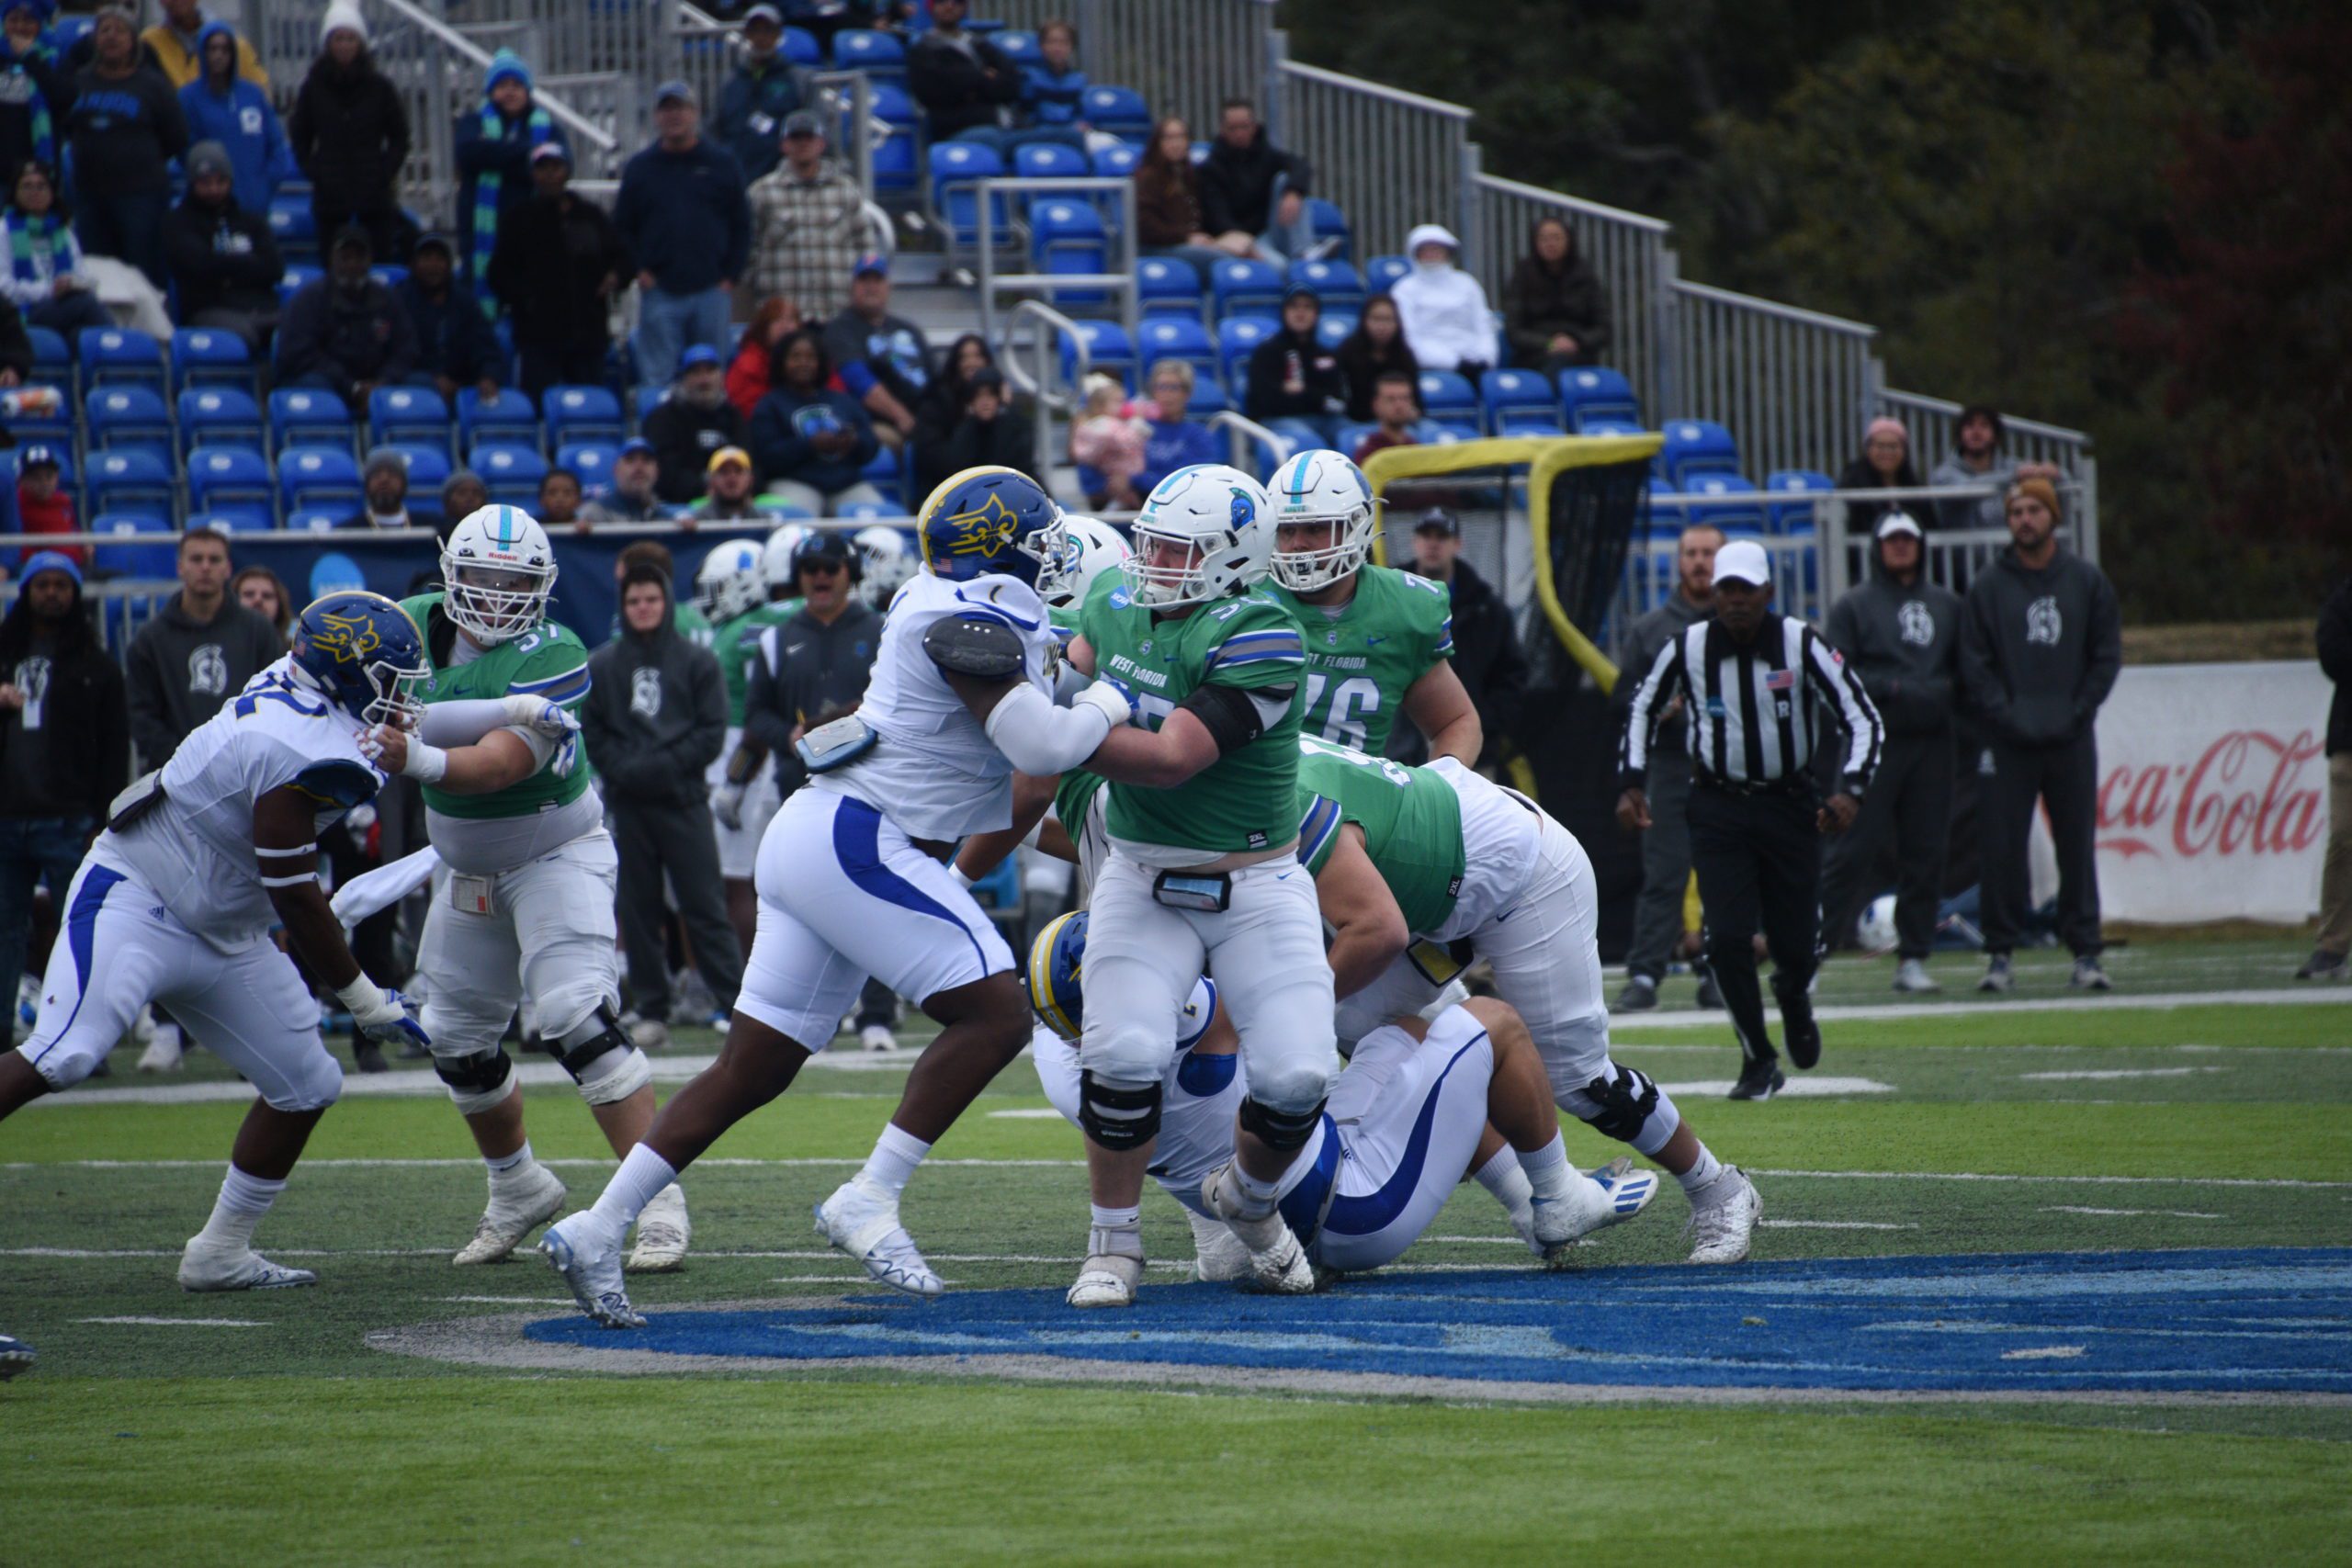 Game against D-I opponent highlights 2023 UWF football schedule